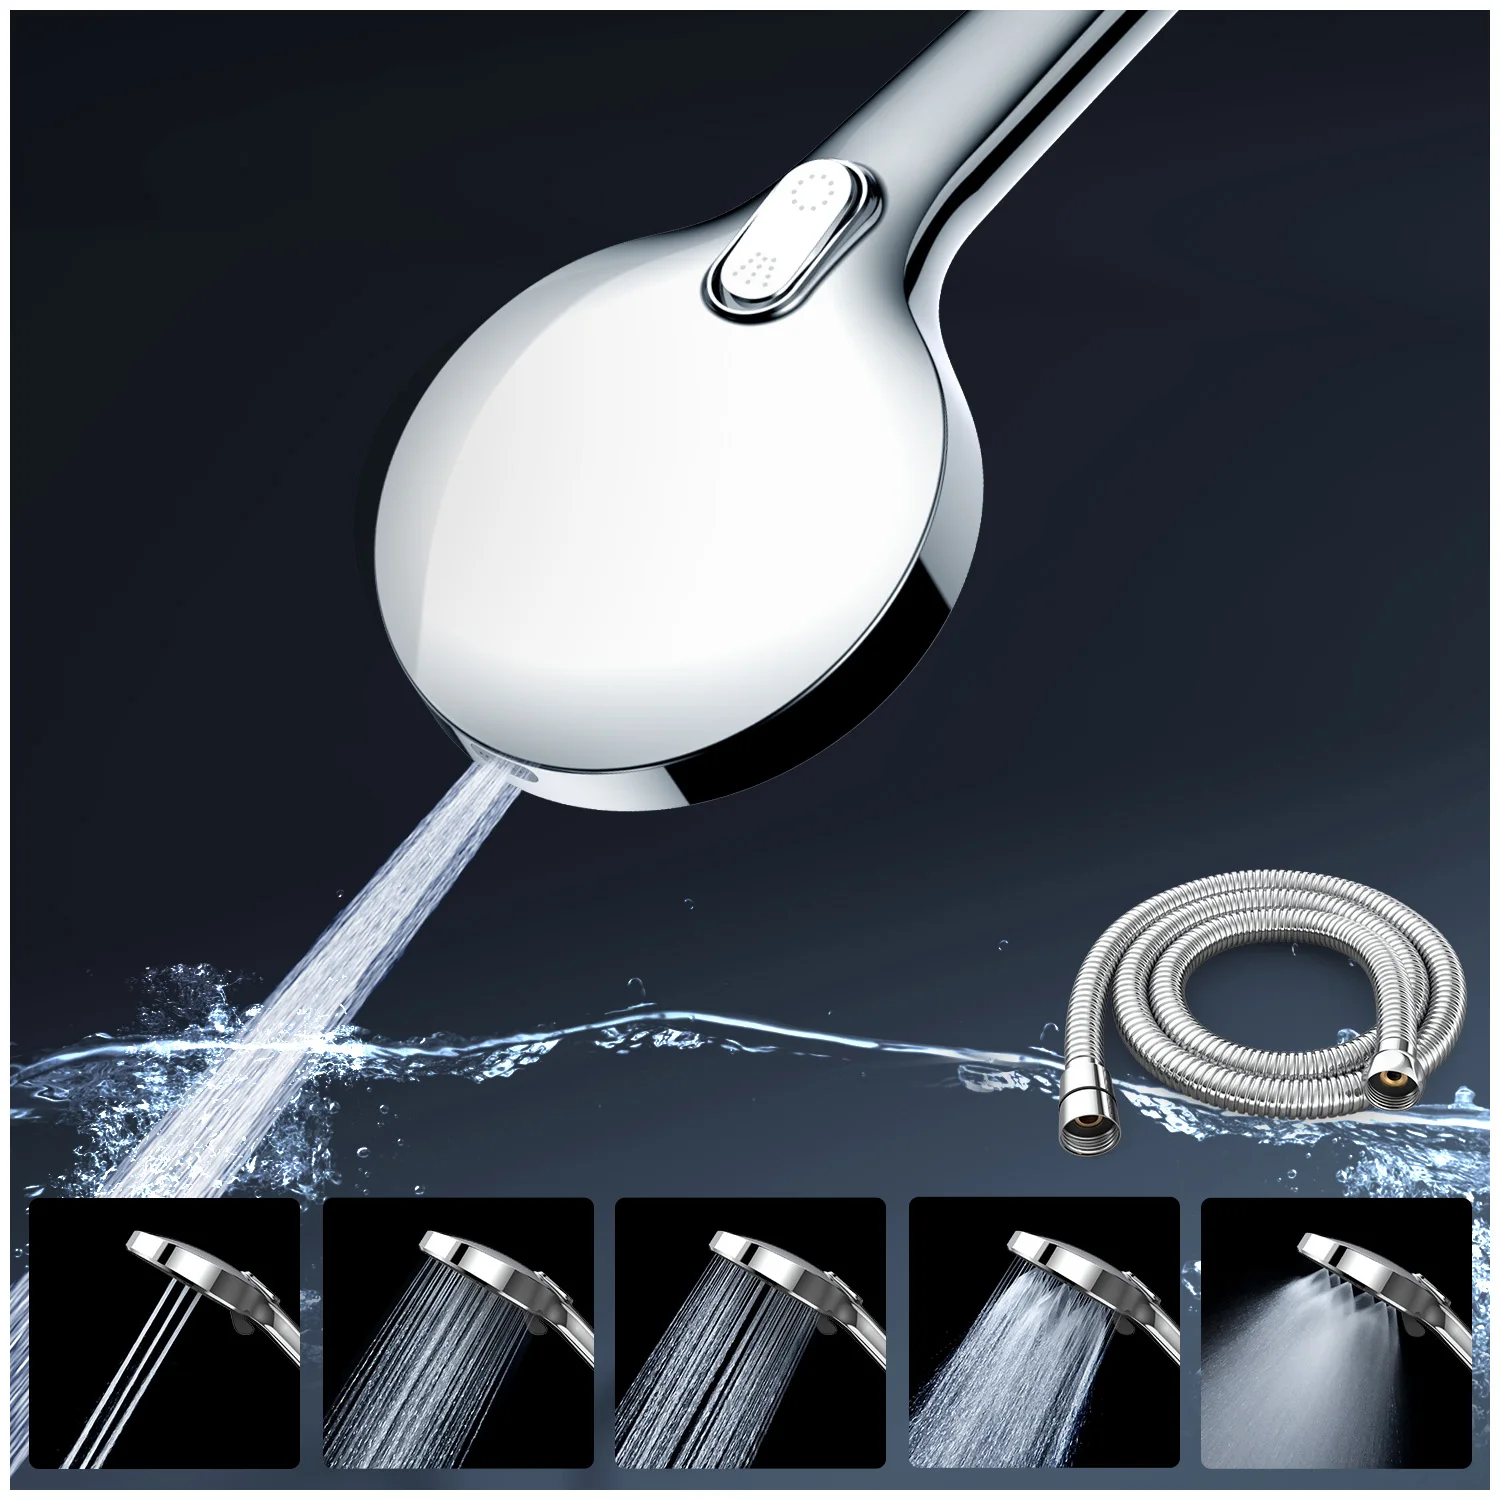 

6-mode Shower Head High Pressure Handheld Showerhead with Hose to Clean Tub Tile & Pets Rainfall Faucet Tap Showers for Bathroom